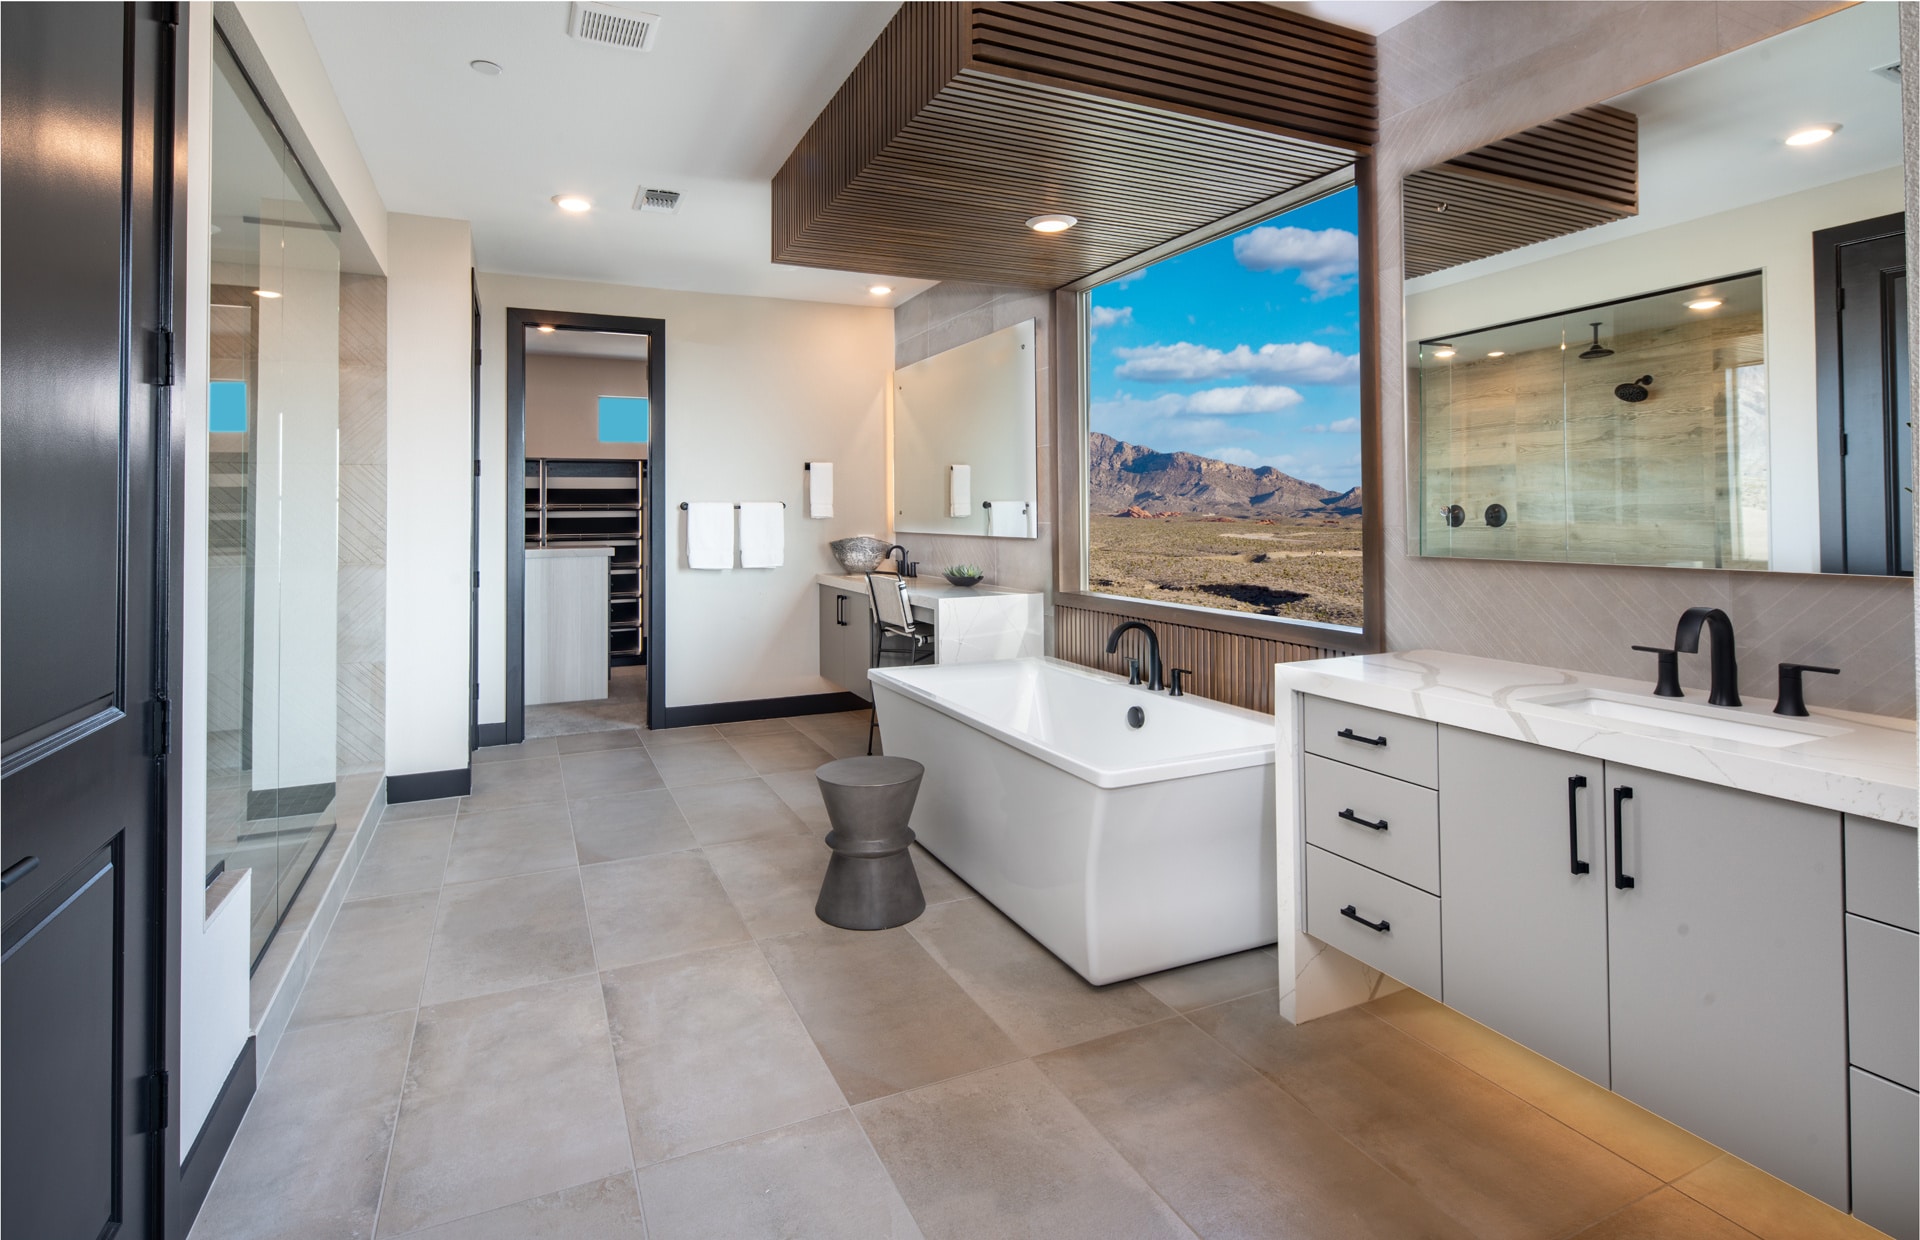 Primary Bathroom of Vittoria Model at Carmel Cliff by Pulte Homes